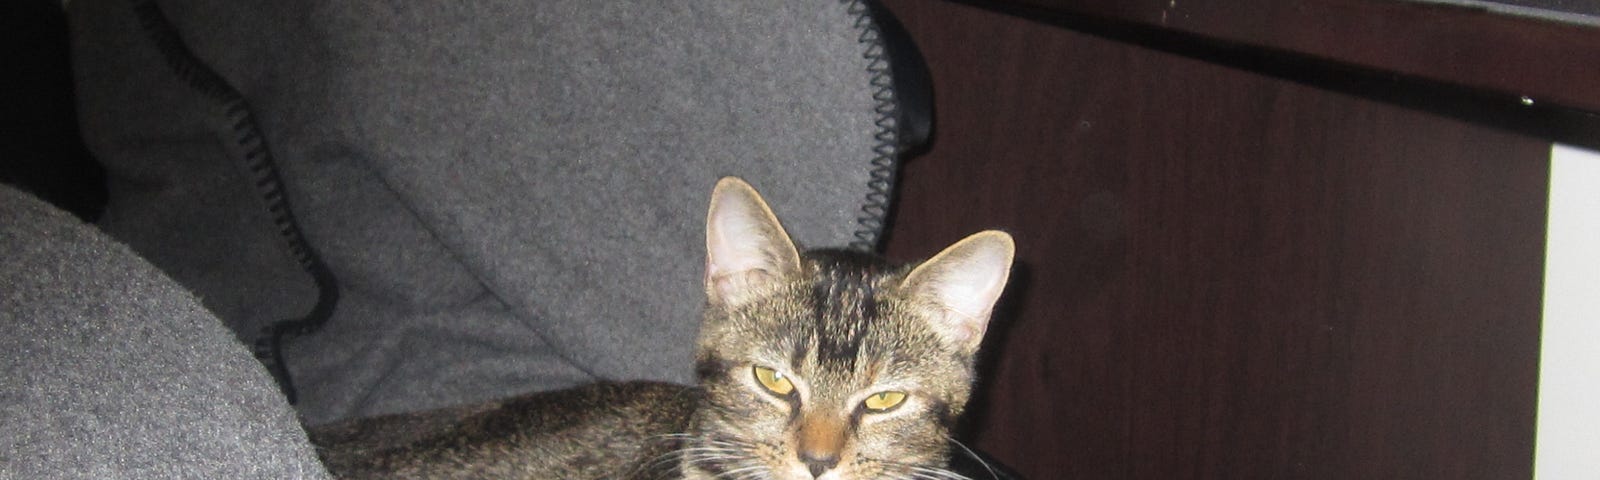 Photo is of my cat Harper Lee as a kitten. She’s sitting on a chair judging me.